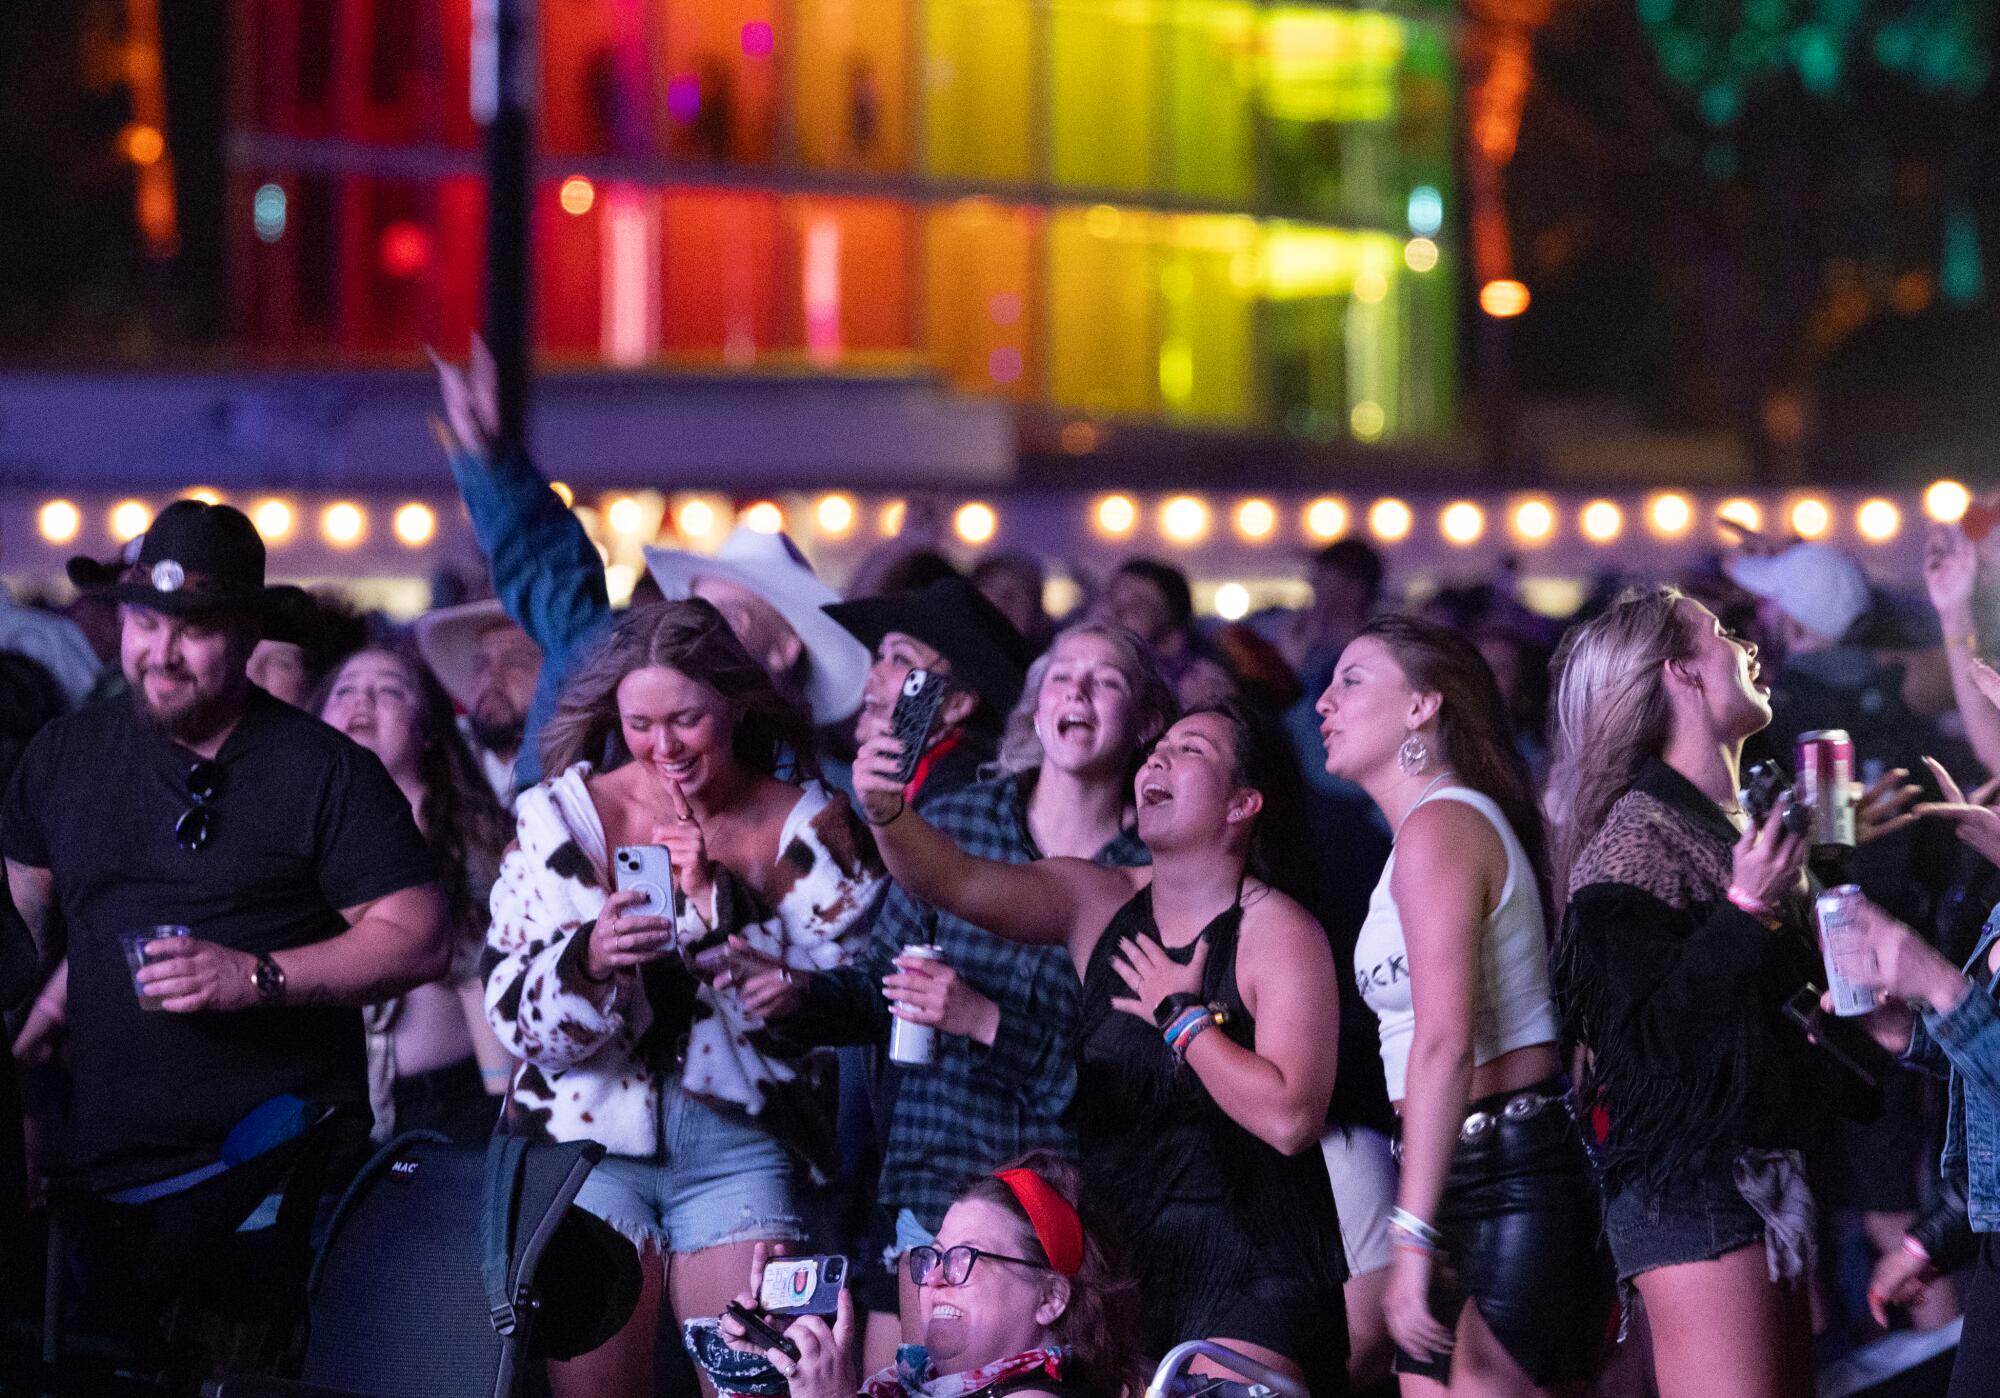 Fans dance and sing along as Jelly Roll performs at the Stagecoach Country Music Festival.